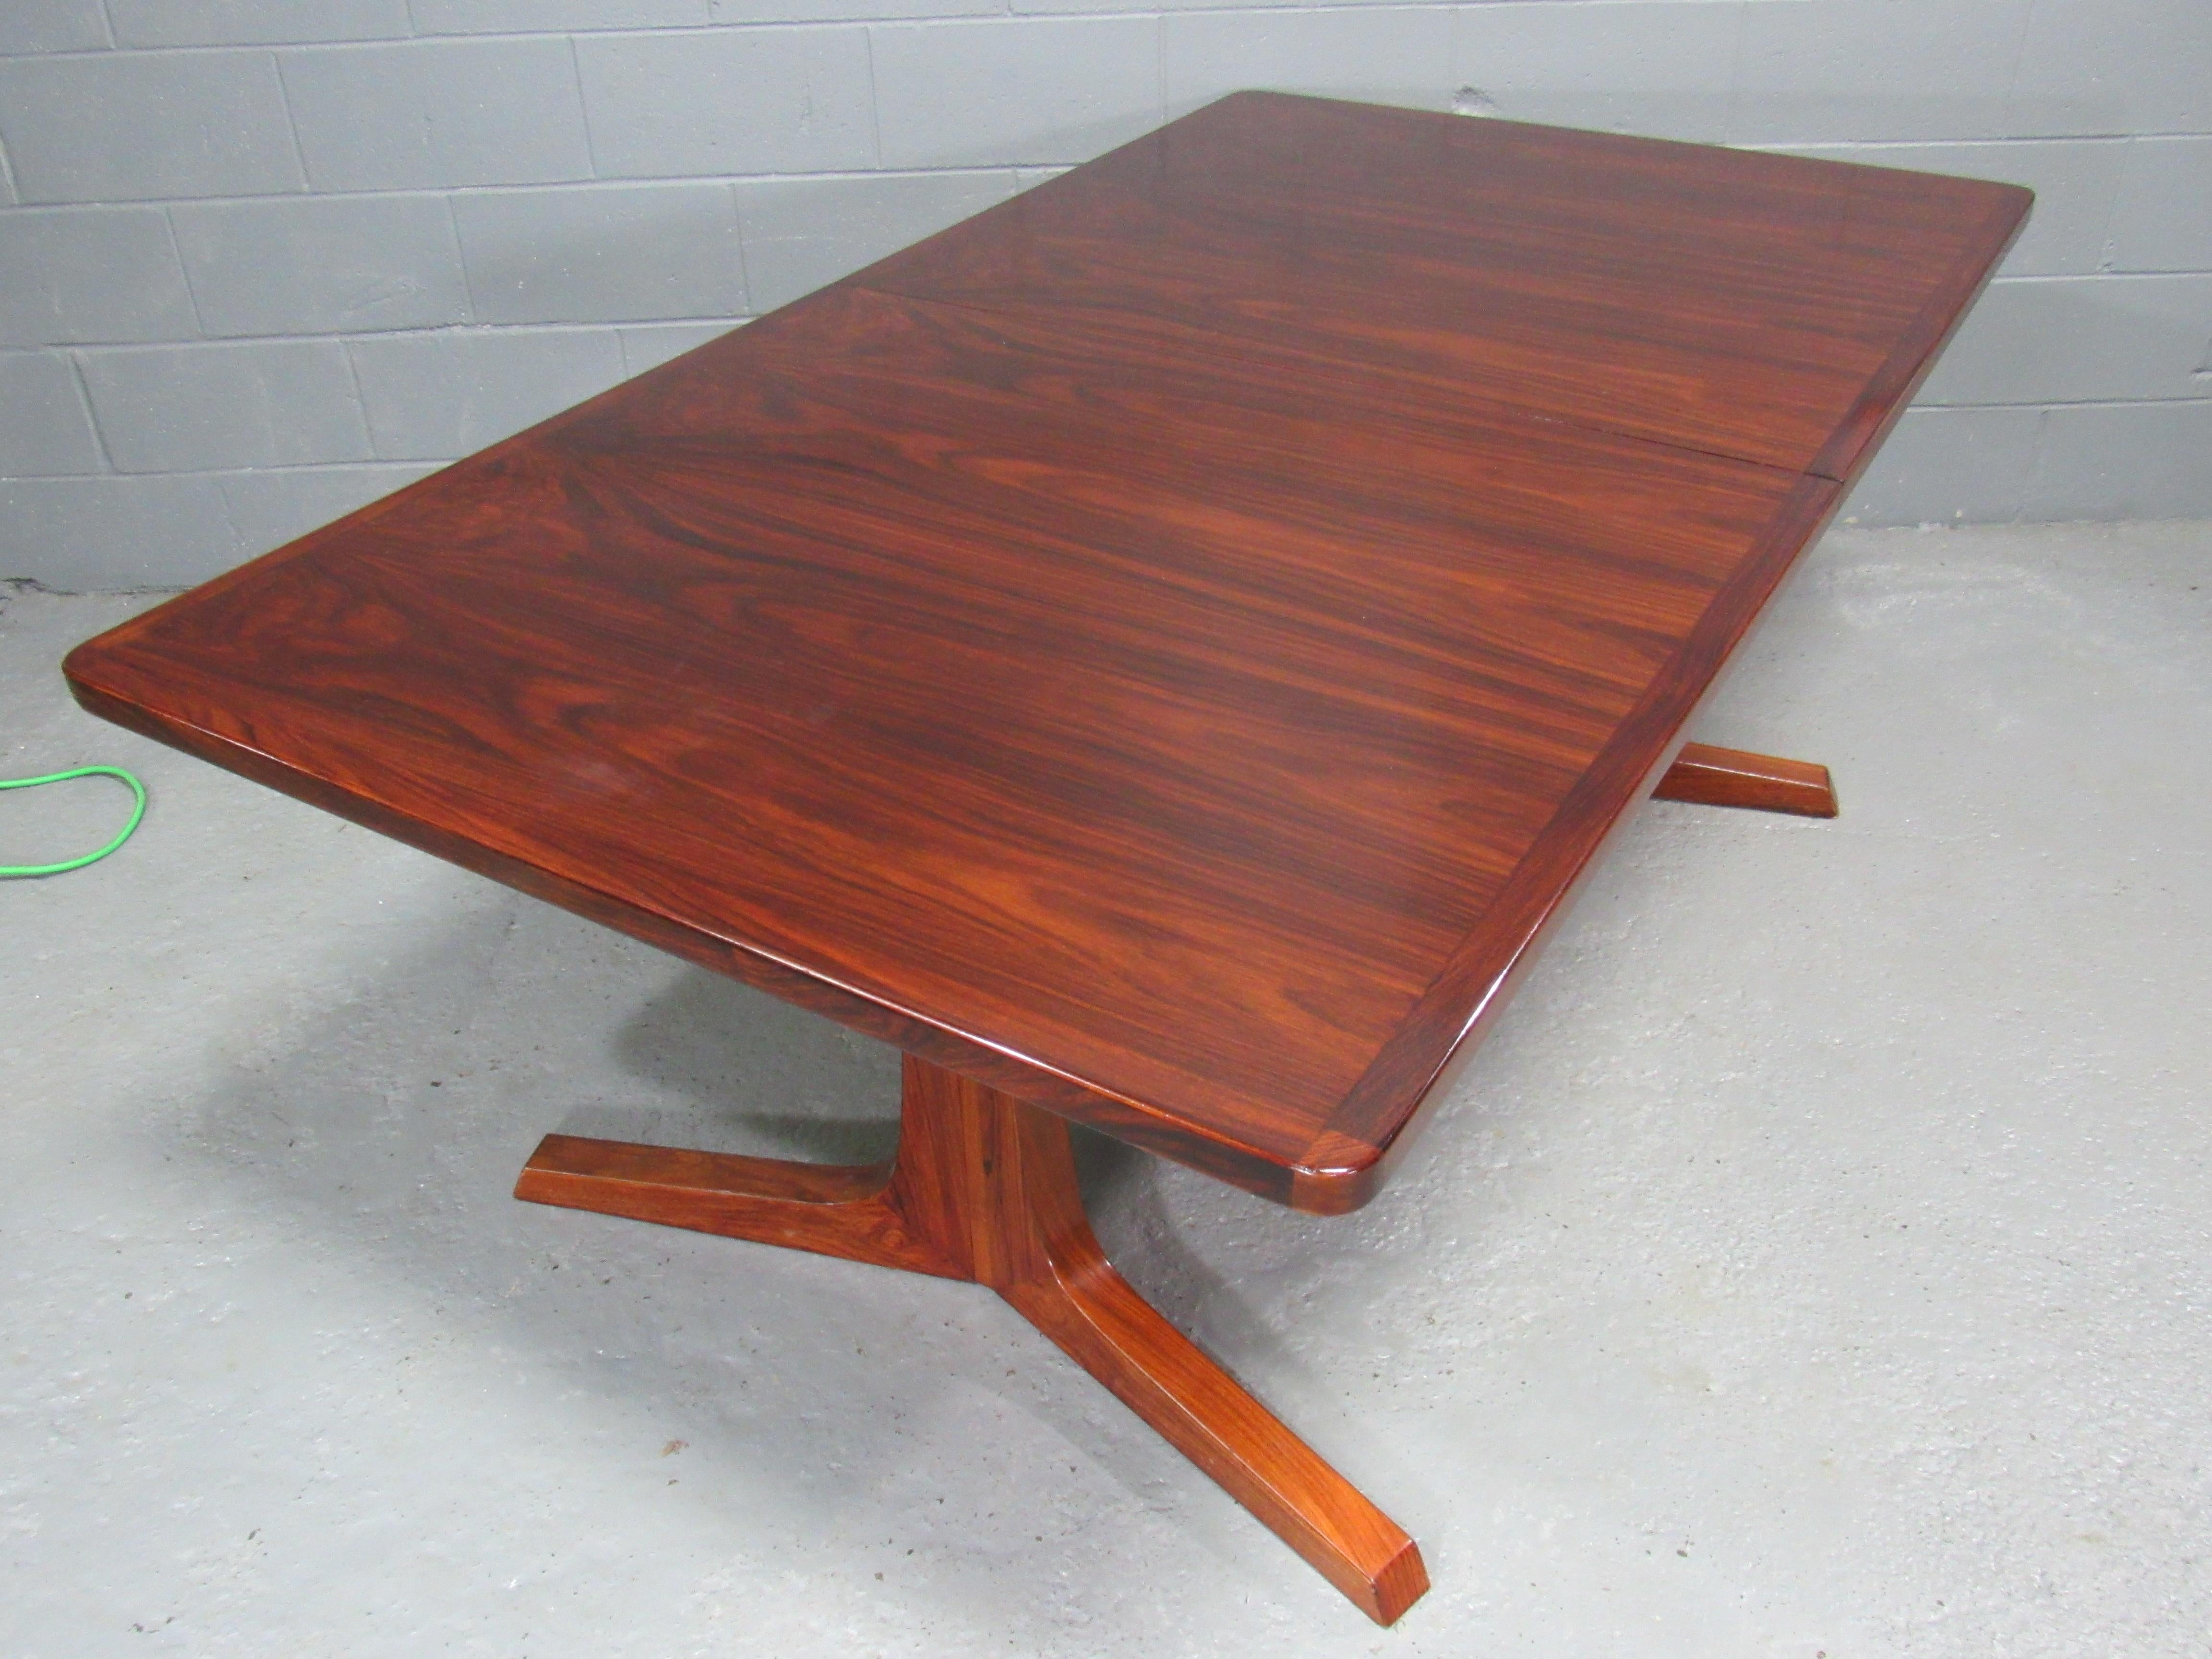 Mid-Century Danish Modern Rosewood Extension Dining Table by Gudme Mobelfabrik. Leaf self stores under table top.  One 19 1/4 in. leaf included.